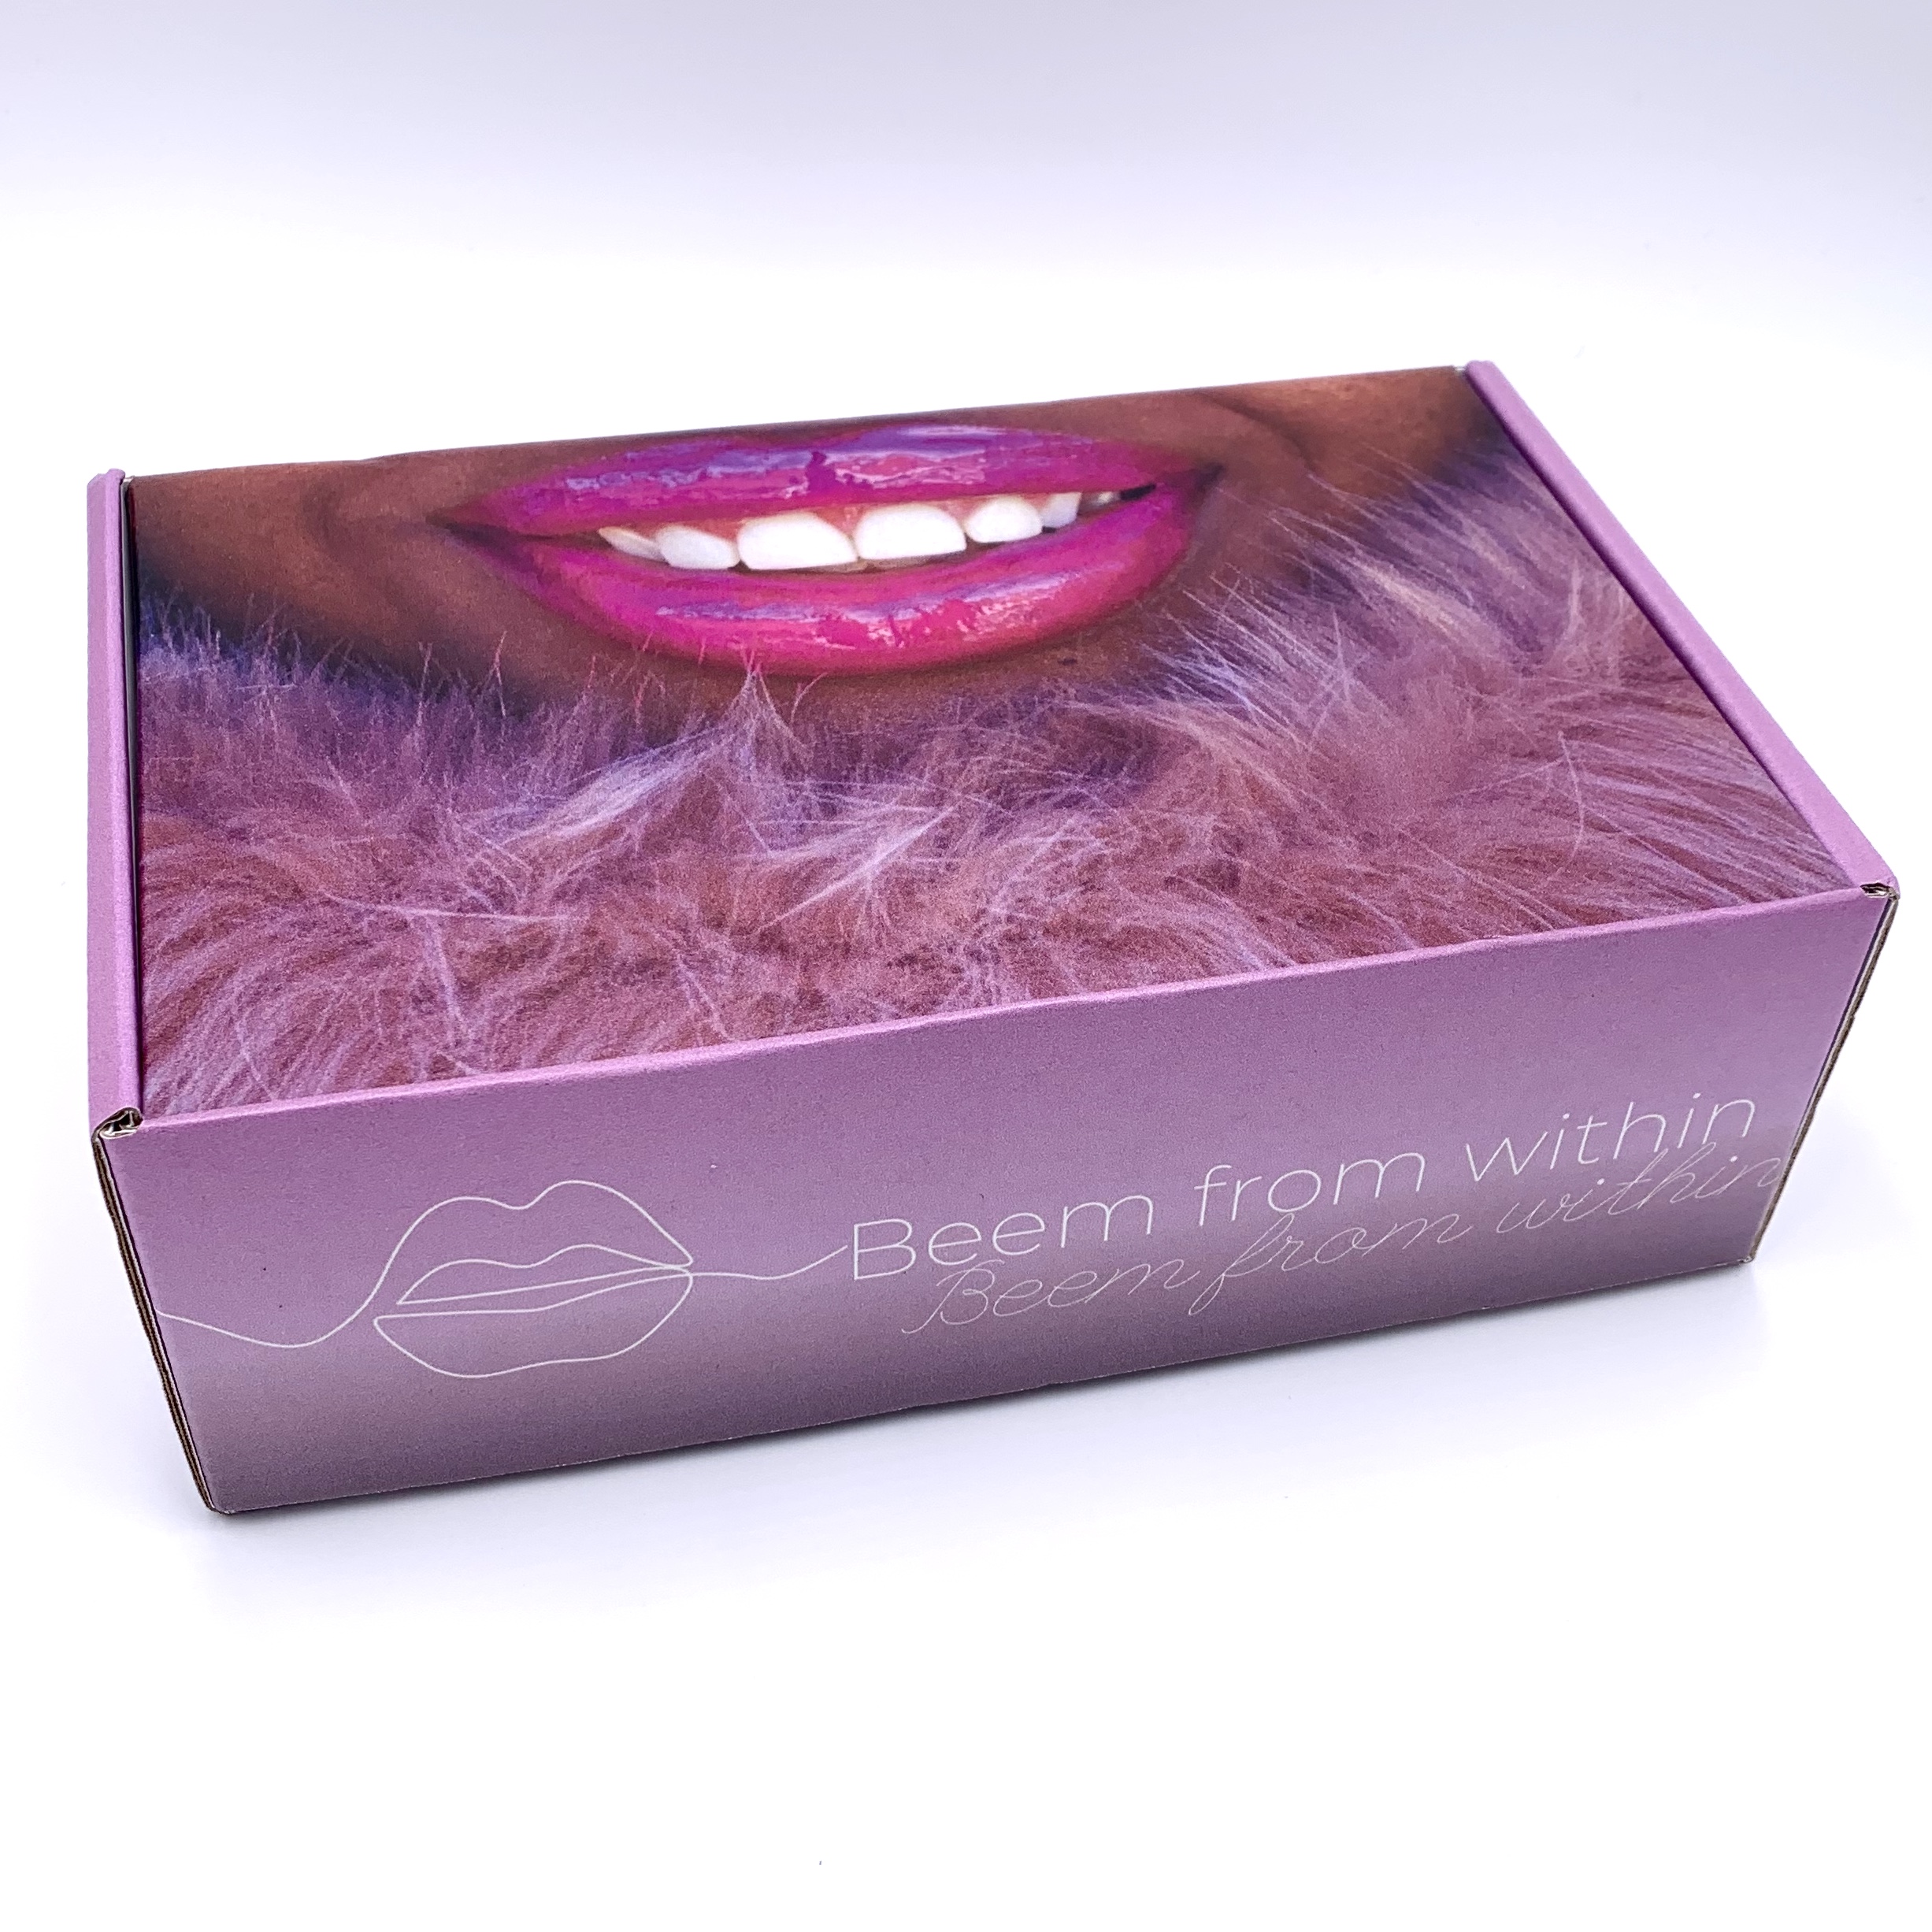 The Beem Box Review – July 2020